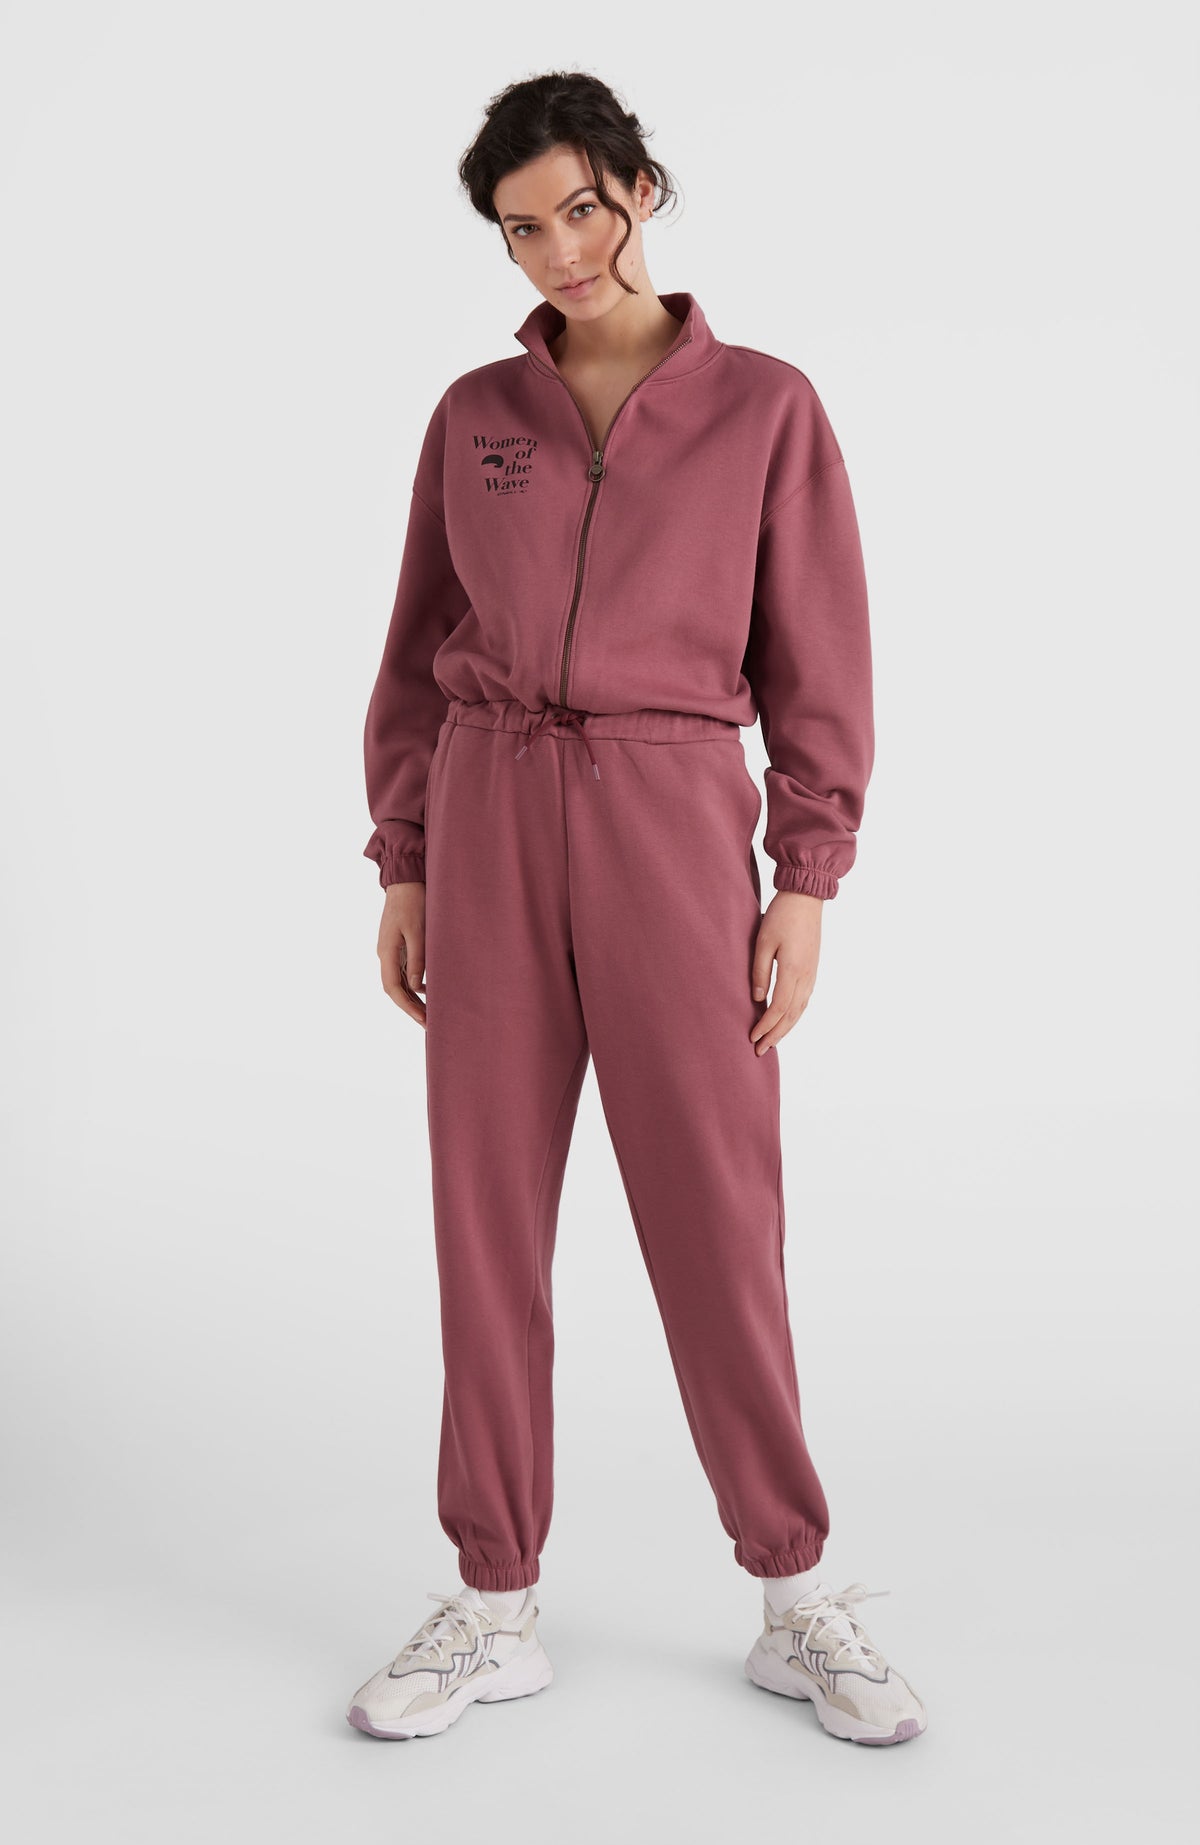 Experiment Statistisch breedtegraad Women Of The Wave Jumpsuit | Nocturne – O'Neill